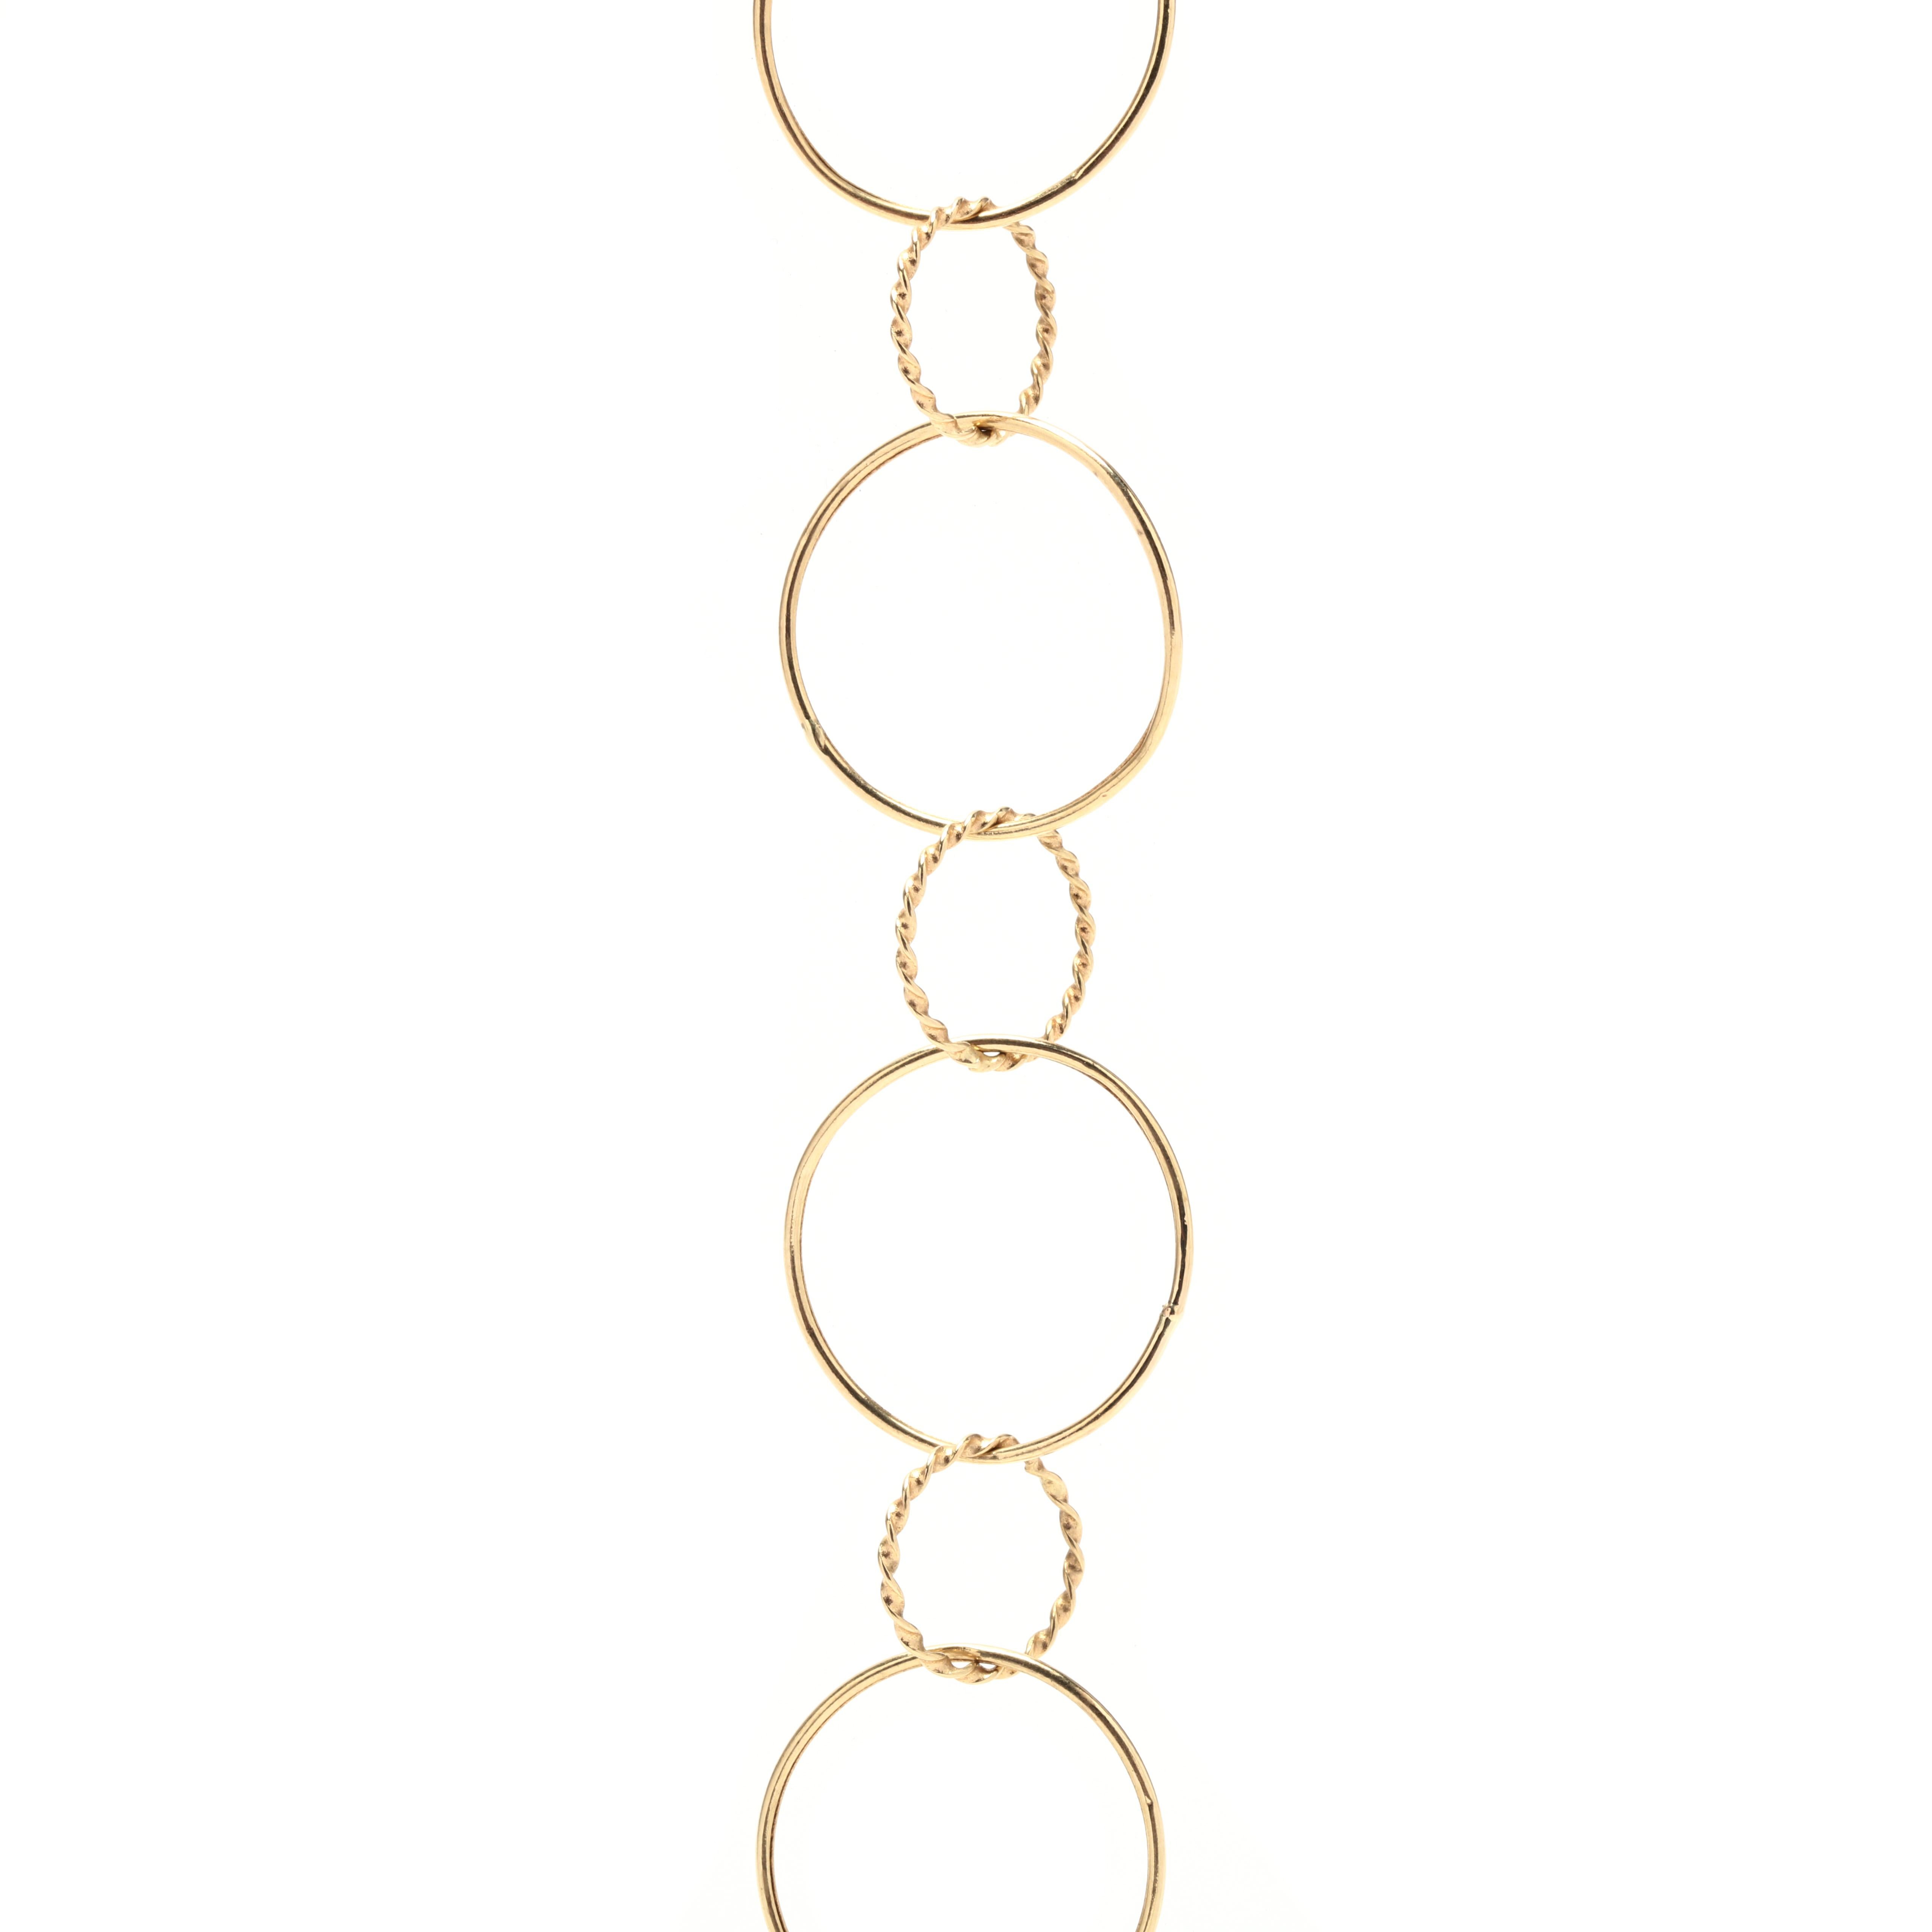 A vintage 14 karat yellow gold multi circle chain necklace. This long layering chain features alternating large polished circle links with small twist circle links and finished with a lobster clasp.

Length: 37 in.

Width: 3/4 in.

Weight: 8.6 dwts.